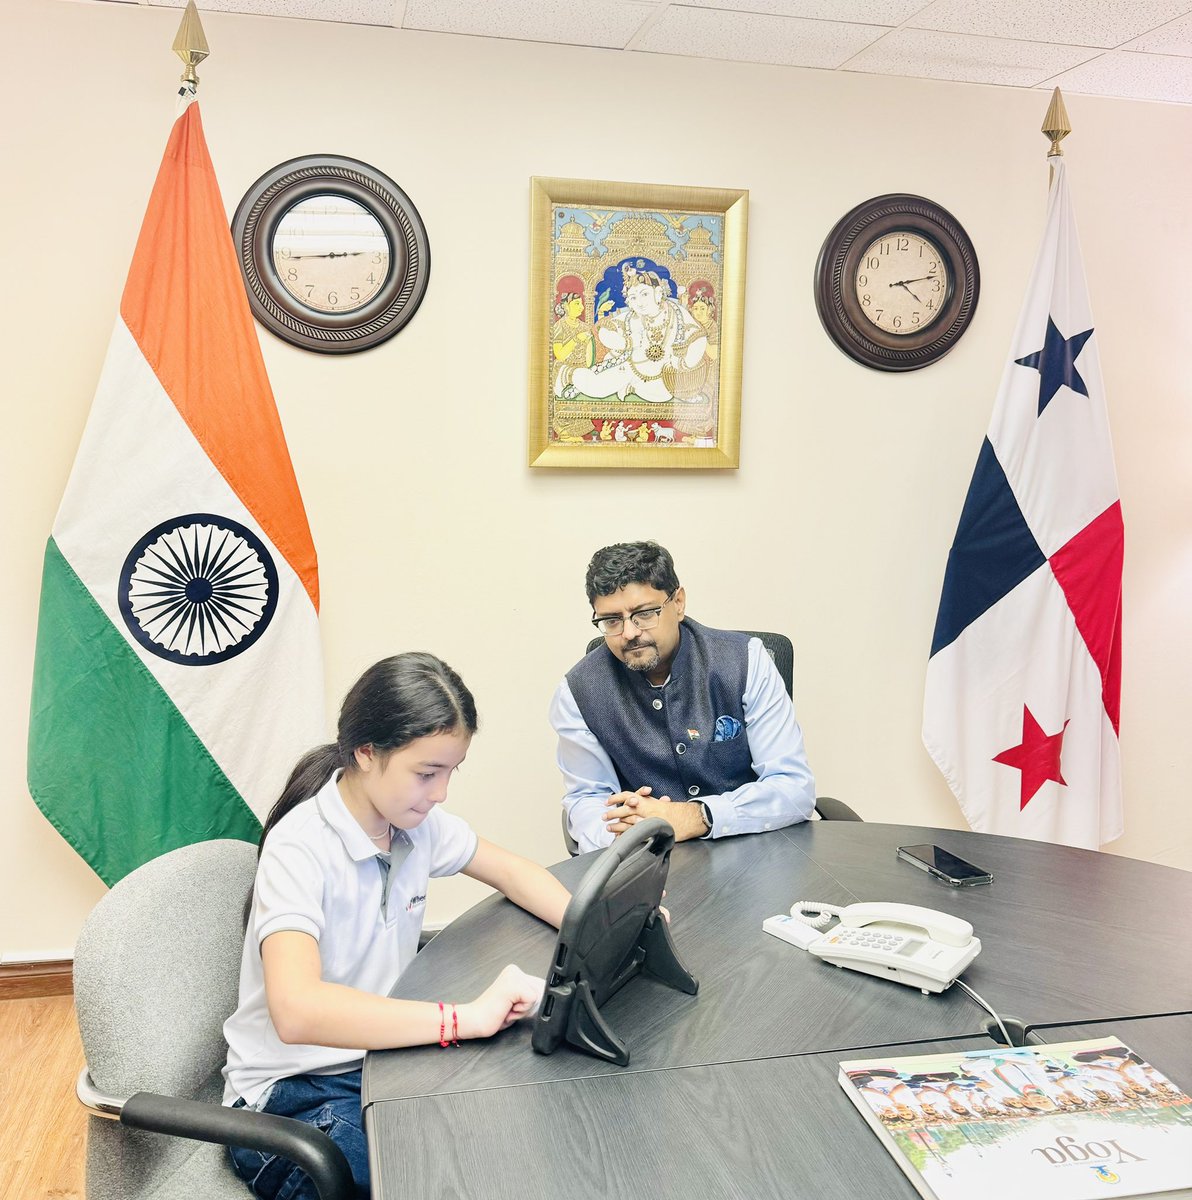 🇮🇳 India Panama 🇵🇦 || Collaborating through Education || Founders of an education start-up Wheeminds met Ambassador along with their students - to brief about their plans and upcoming International Competition in India. An innovative way to bring India-Panama together.